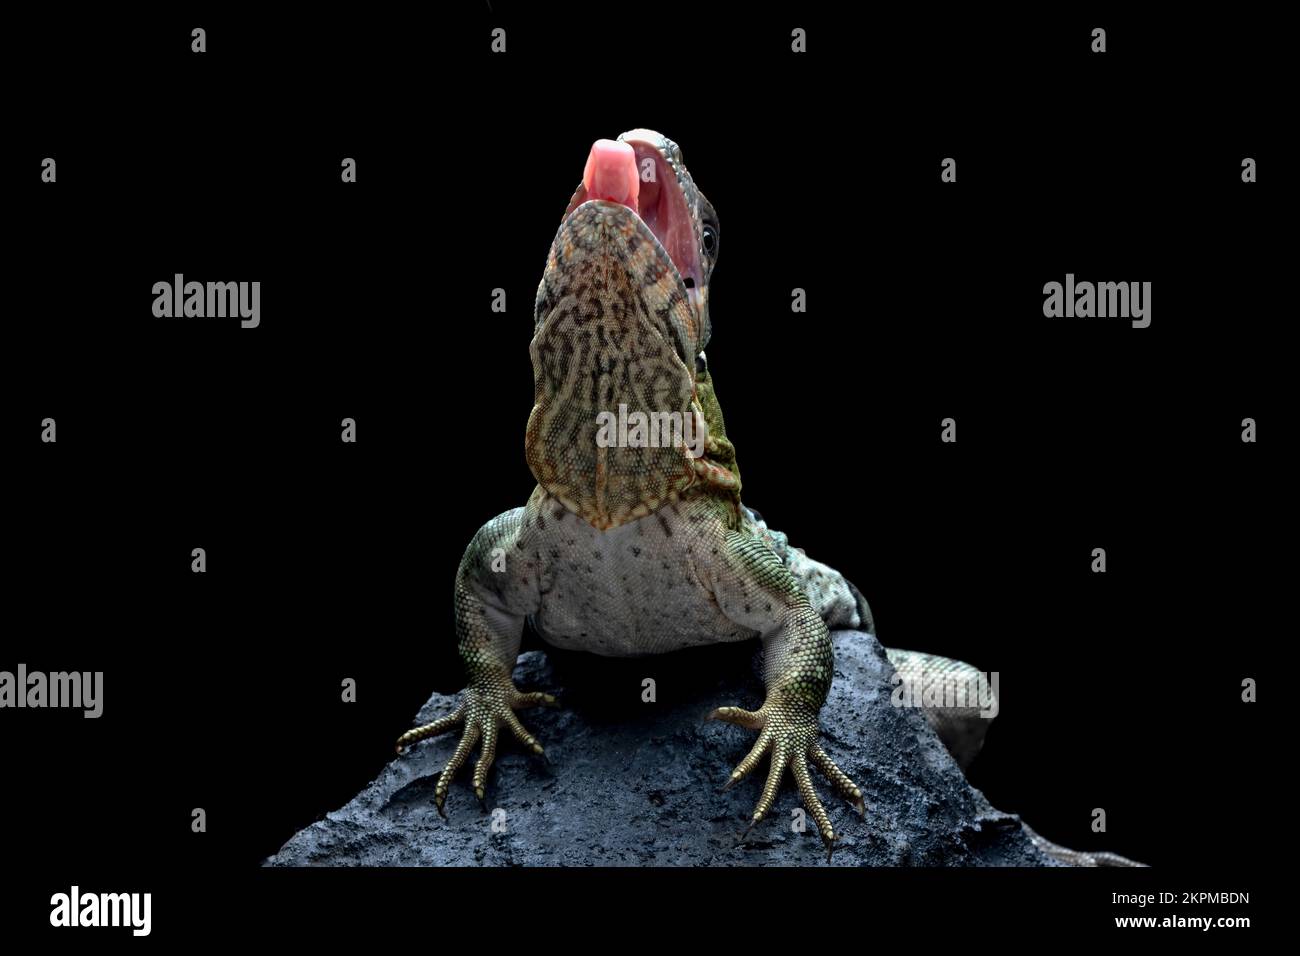 Close-up of a black iguana on a rock, Indonesia Stock Photo